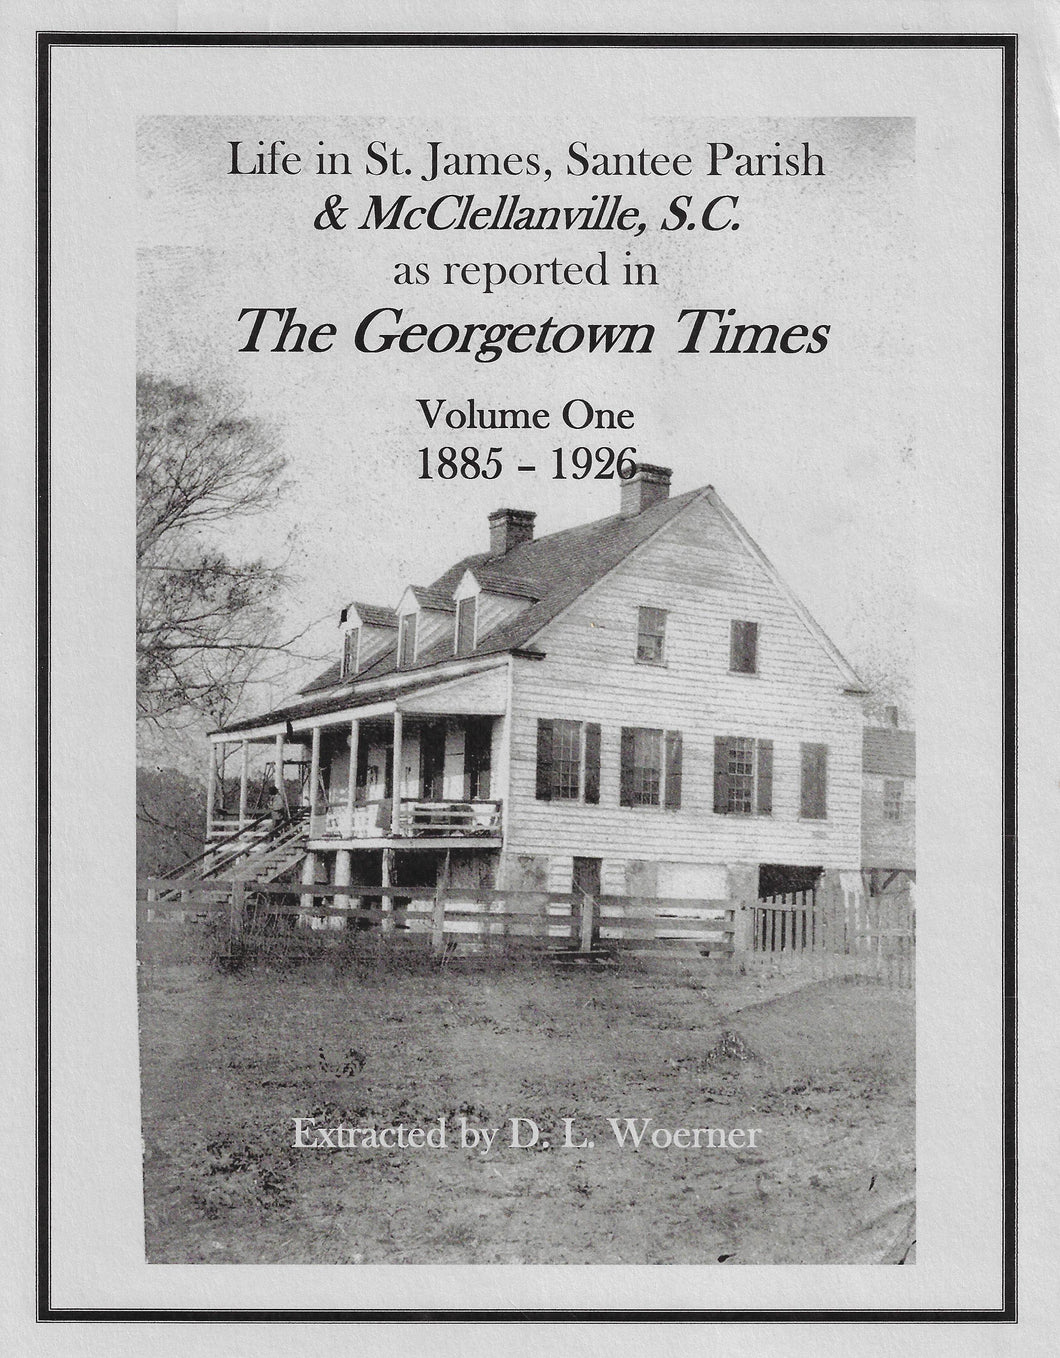 Life in St. James Santee Parish & McClellanville, SC as reported in the Georgetown Times